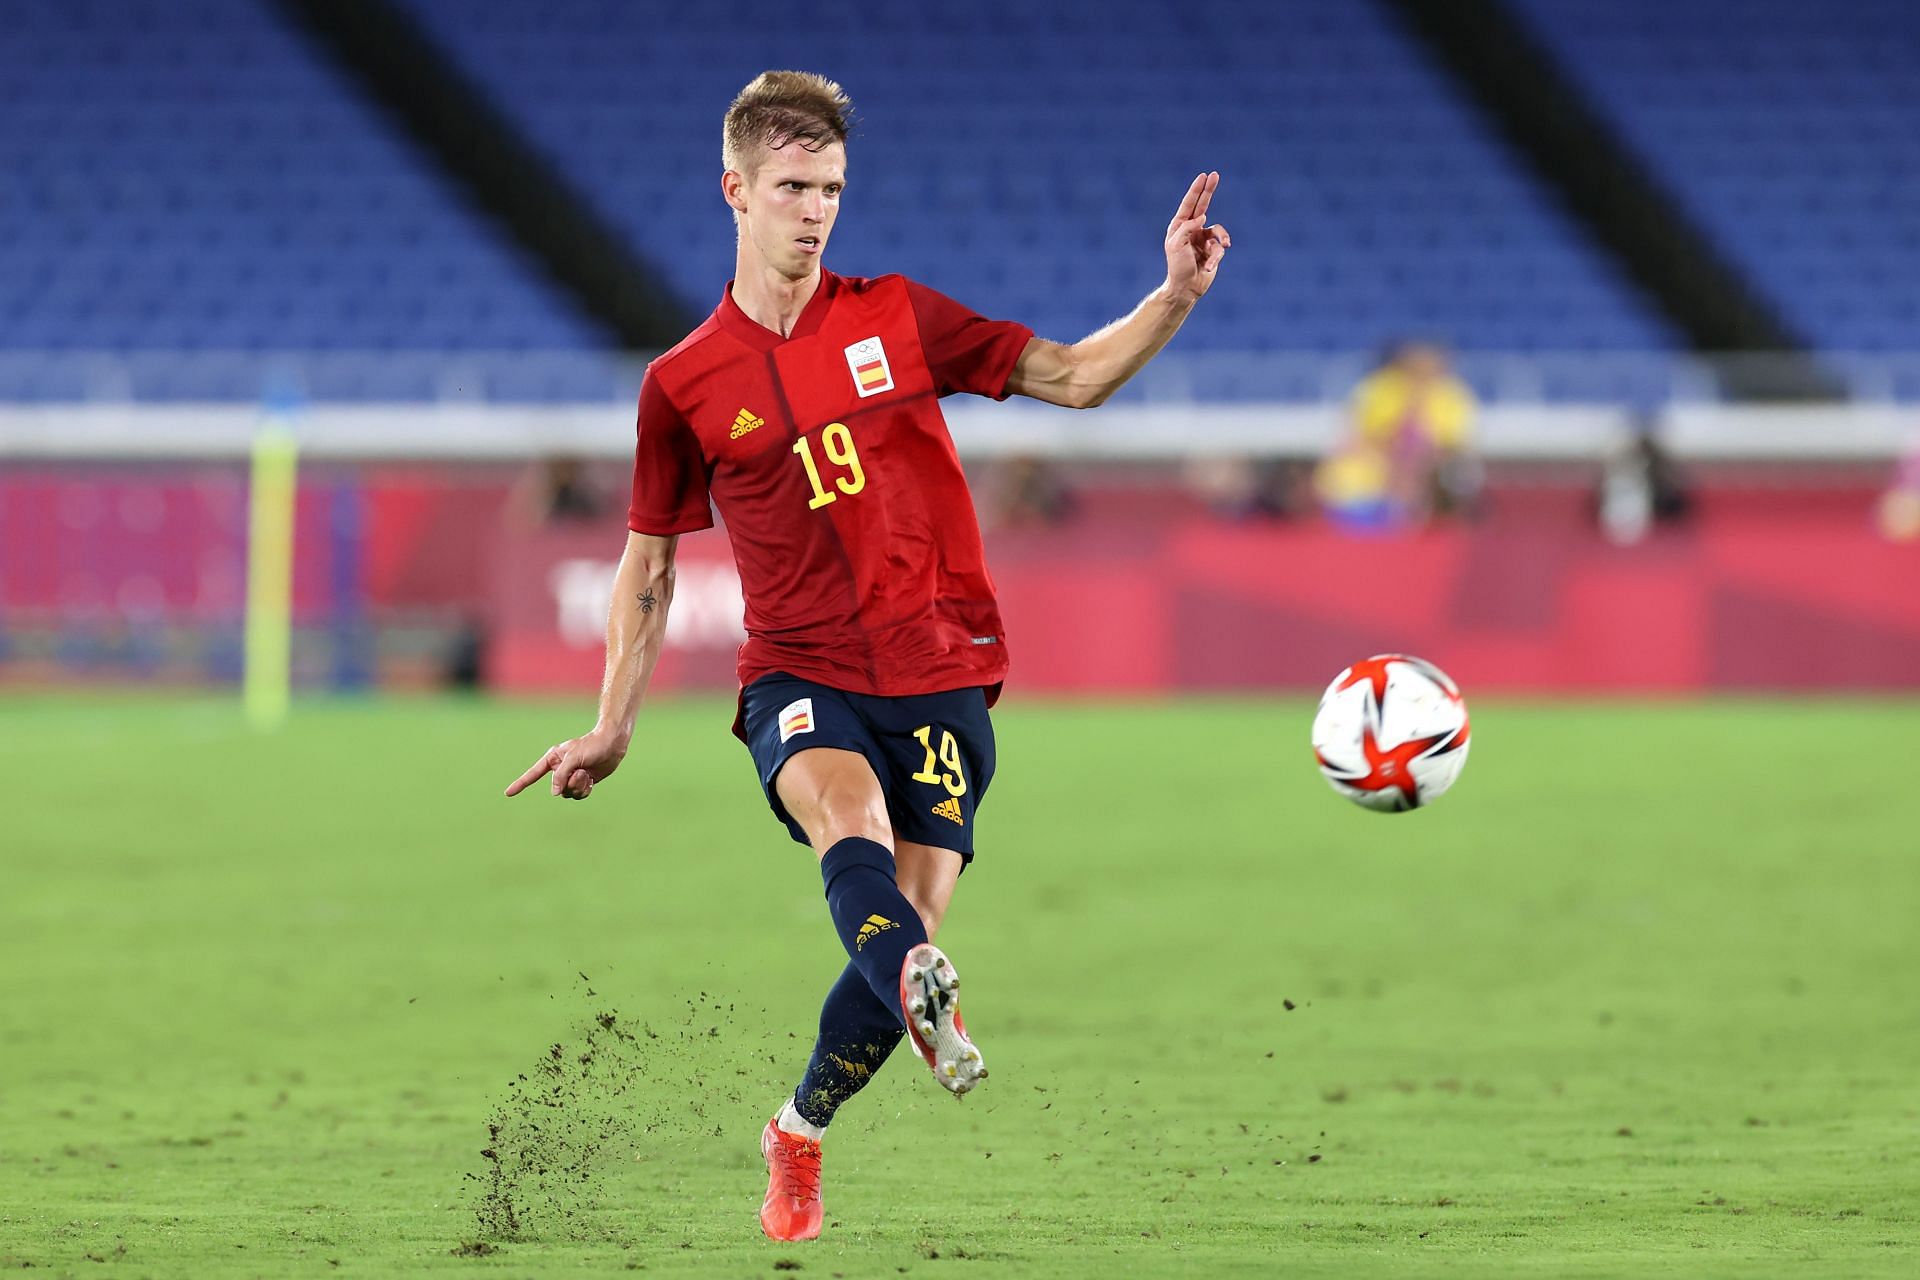 Barcelona have received a setback in their quest to sign Dani Olmo.